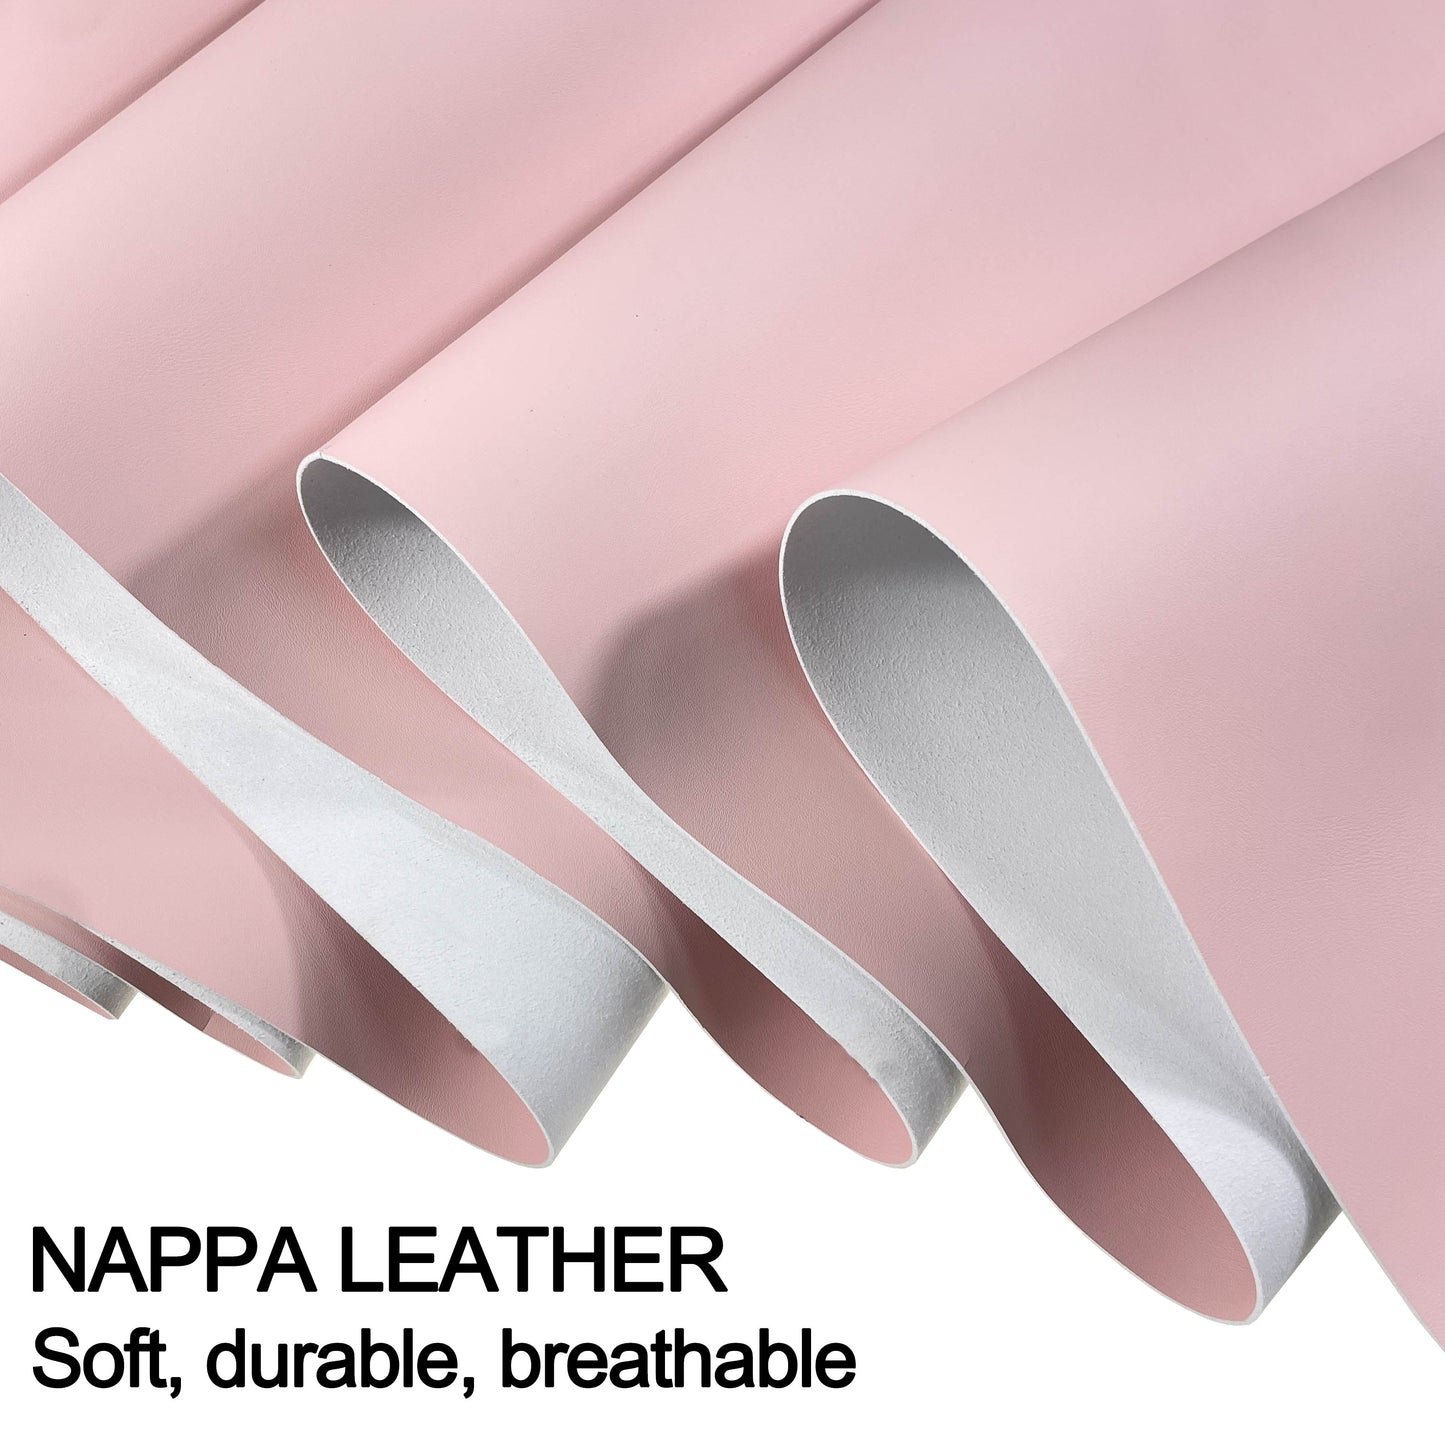 Nappa Leather Steering Wheel Cover Lace Up, Stitch on Wrap, Universal 15 inch, Anti-Slip & Breathable & Soft Pink